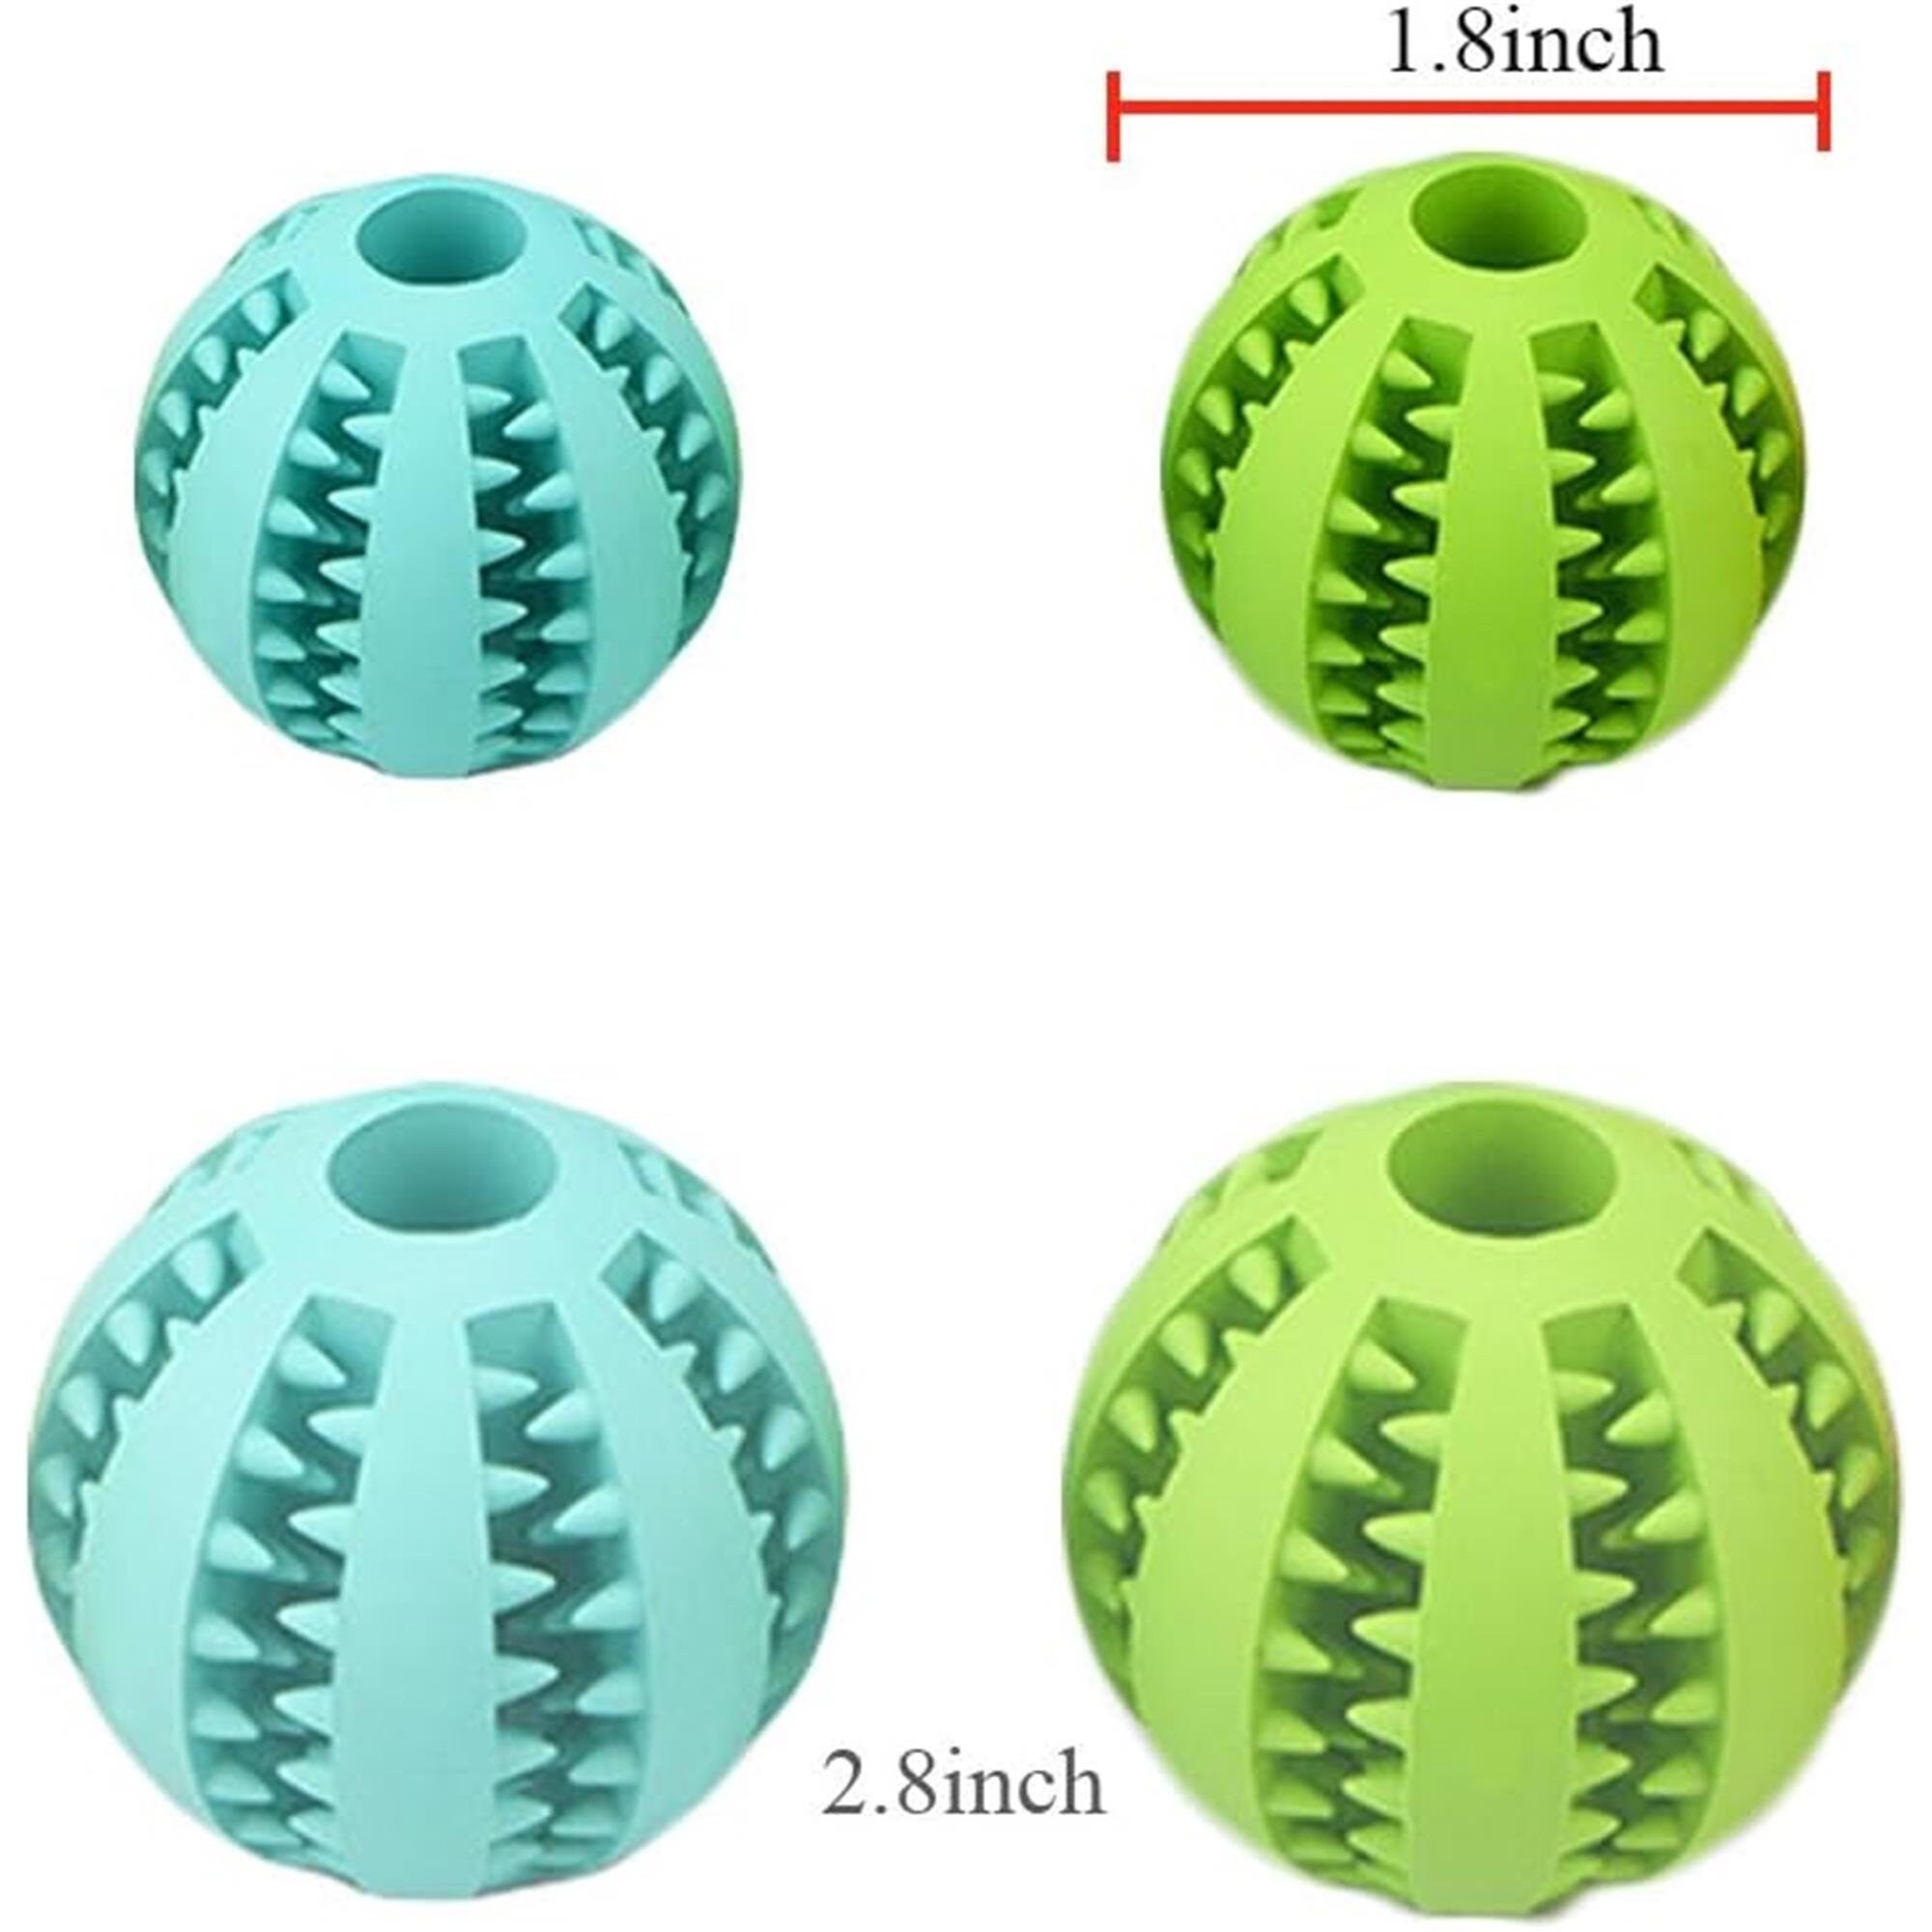 Puppy Teething Chew Toy Balls: 2pack Interactive Dog Treat Dispensing Ball  Rubber Small Breed Dog Chewing Enrichment Toys for Boredom and Brain